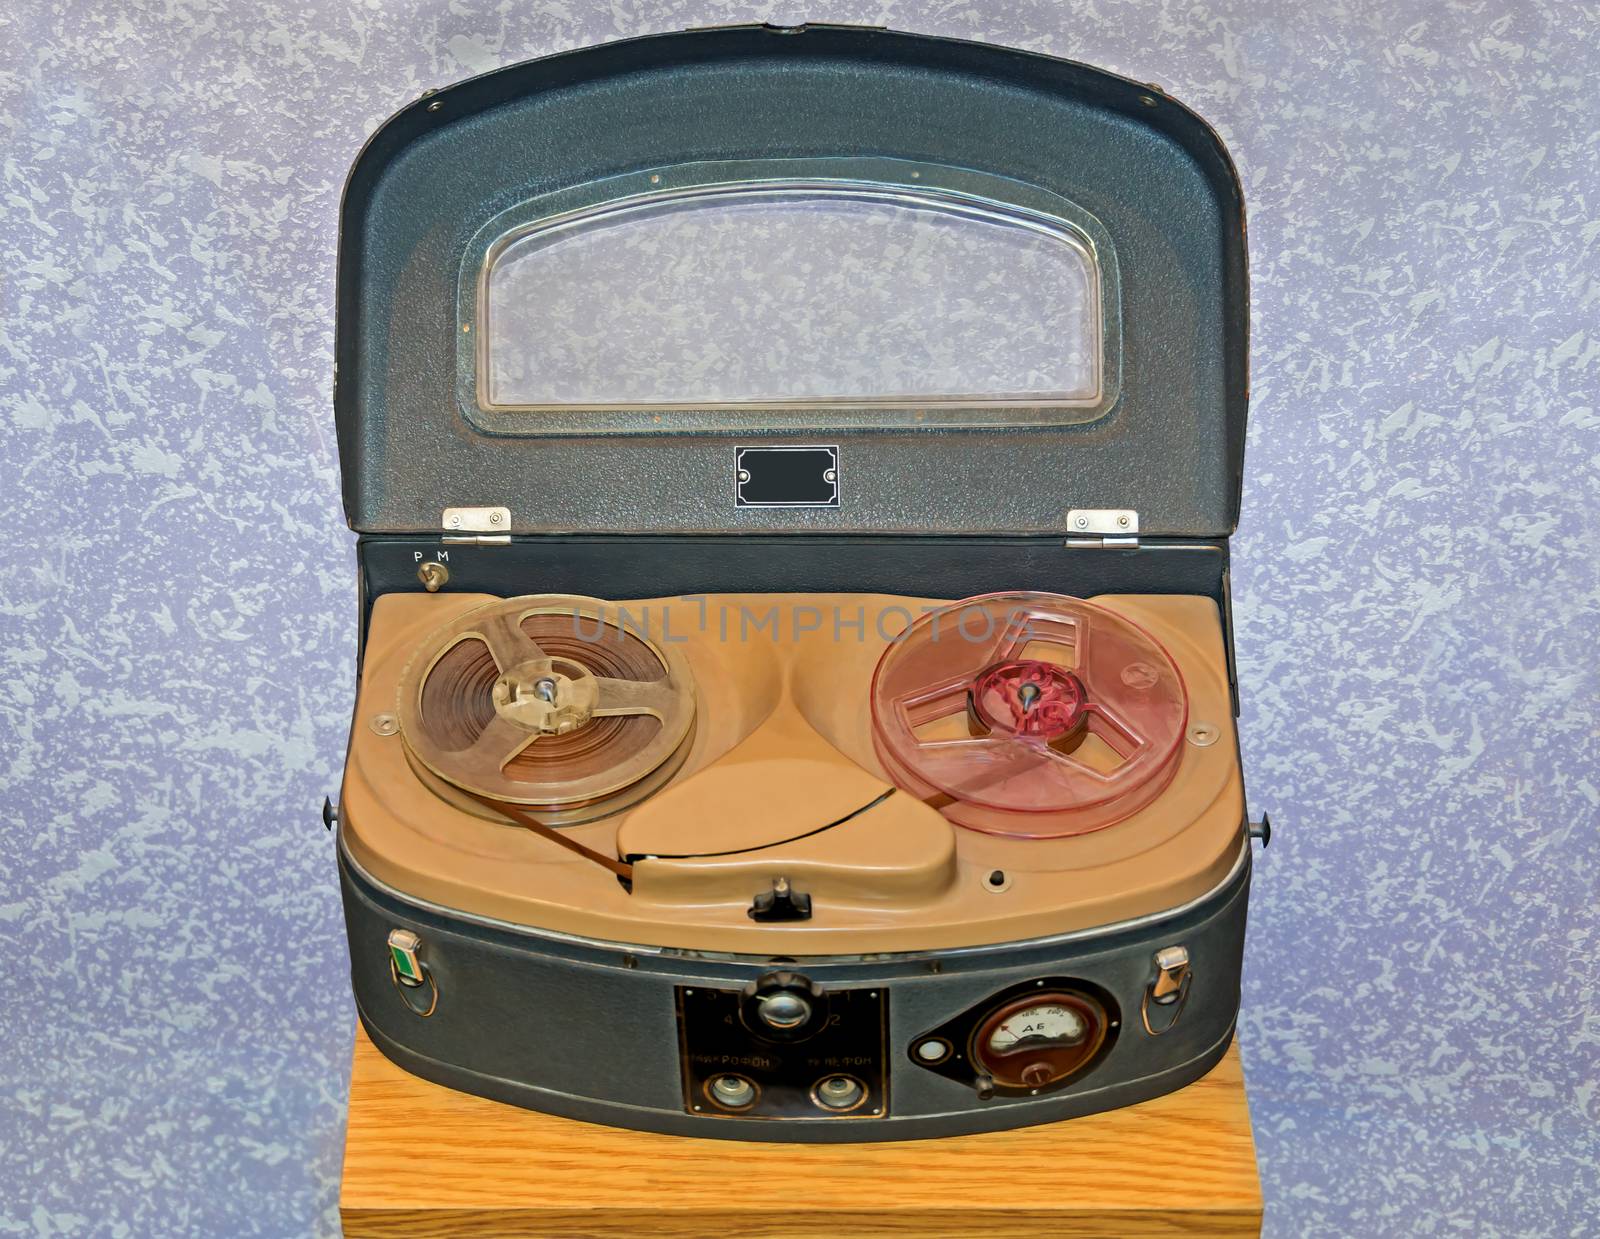 Old Soviet reporter's portable boombox 1950 release.